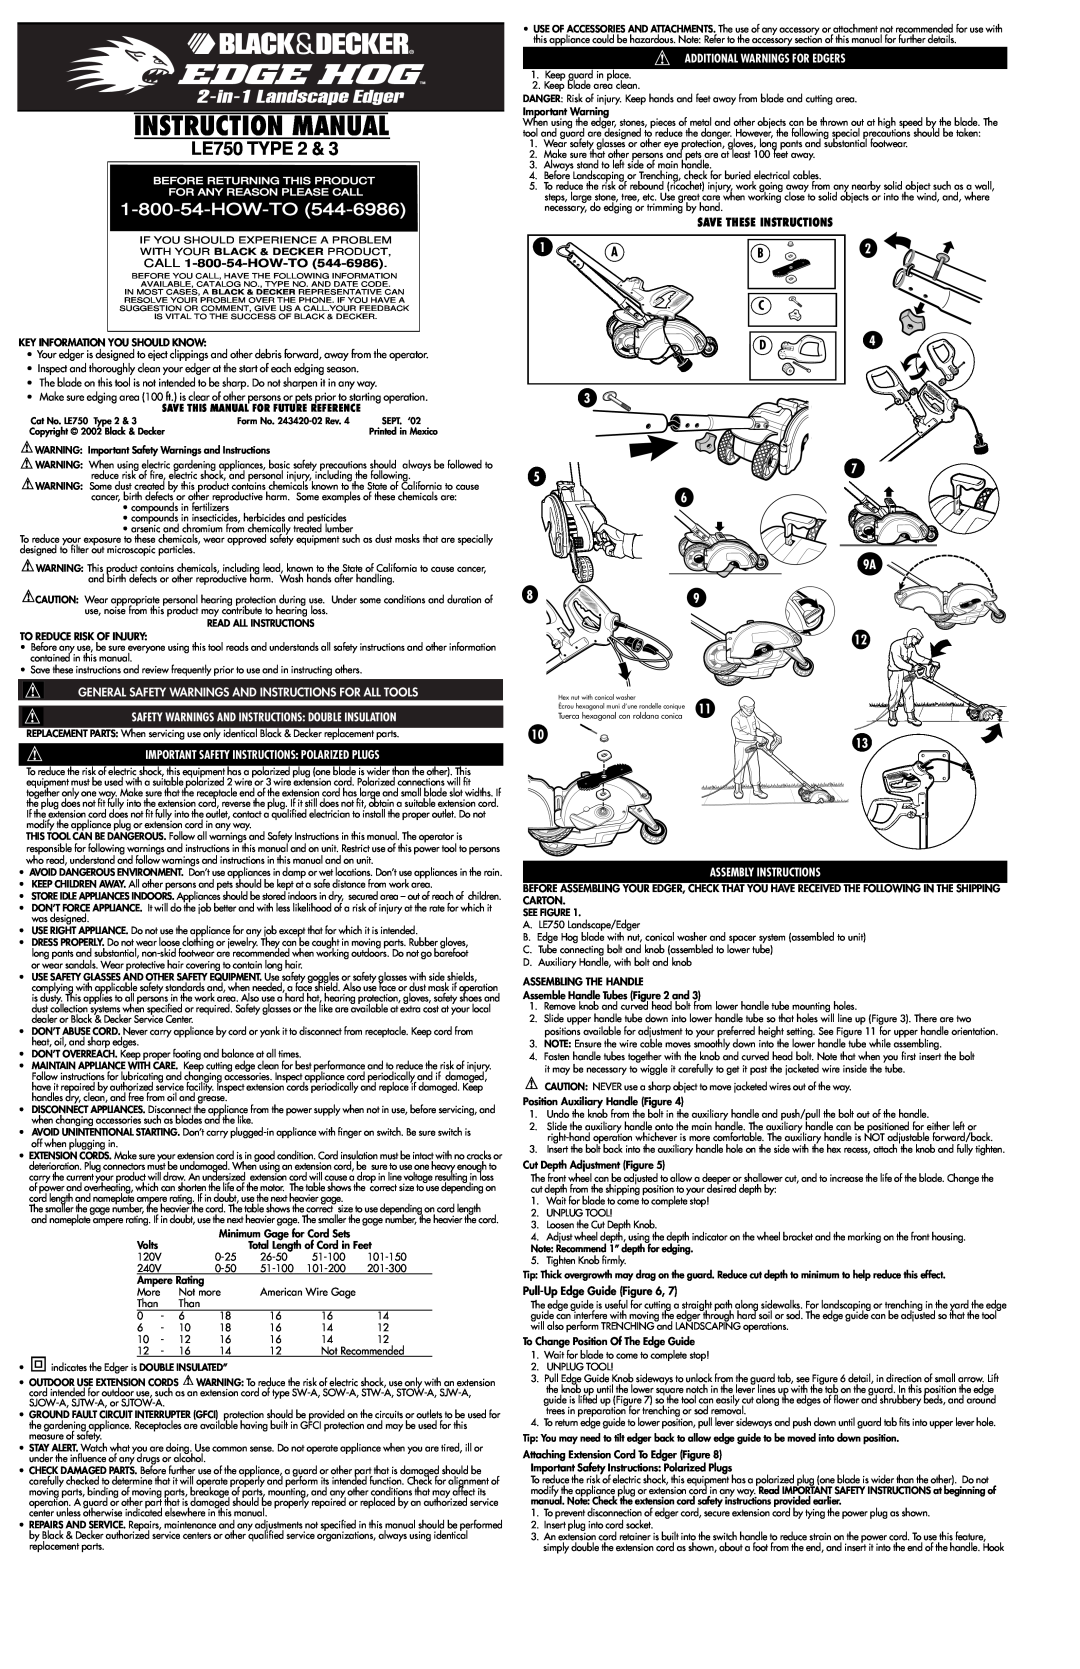 Black & Decker LE750R, FHV1200W important safety instructions Instruction Manual, LE750 TYPE, How-To 